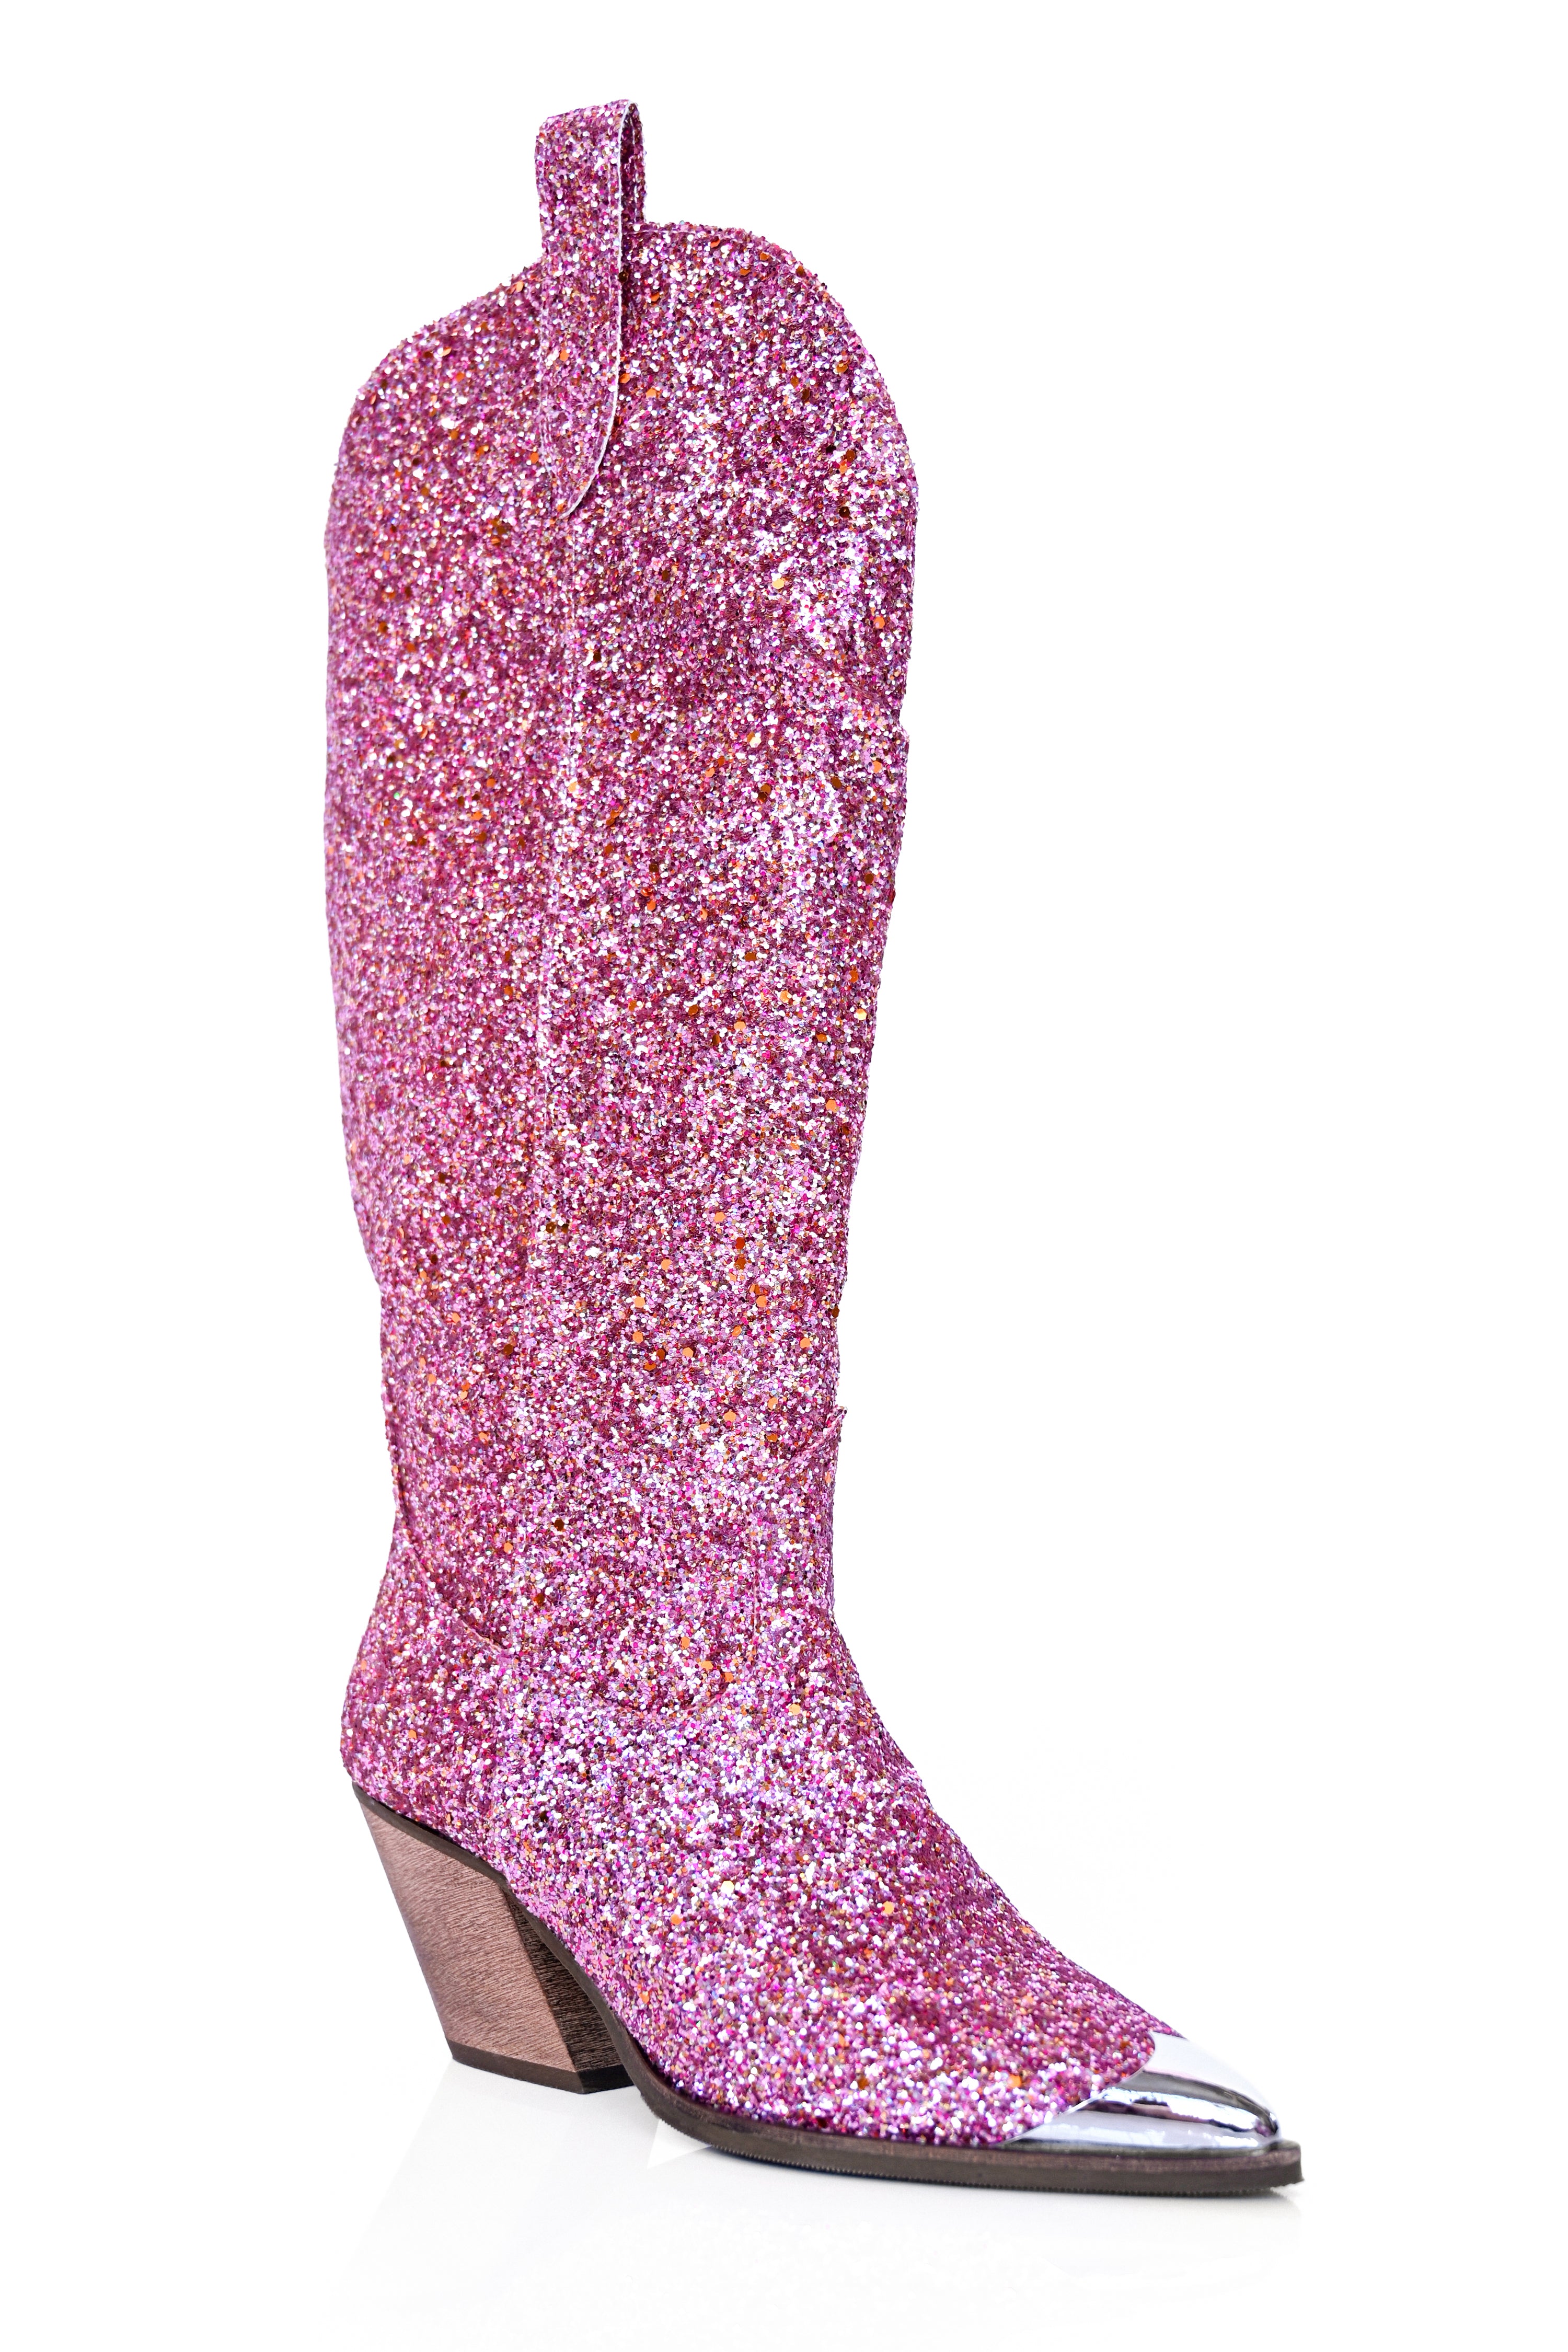 Rodeo Queen Glitter Cowgirl Boots